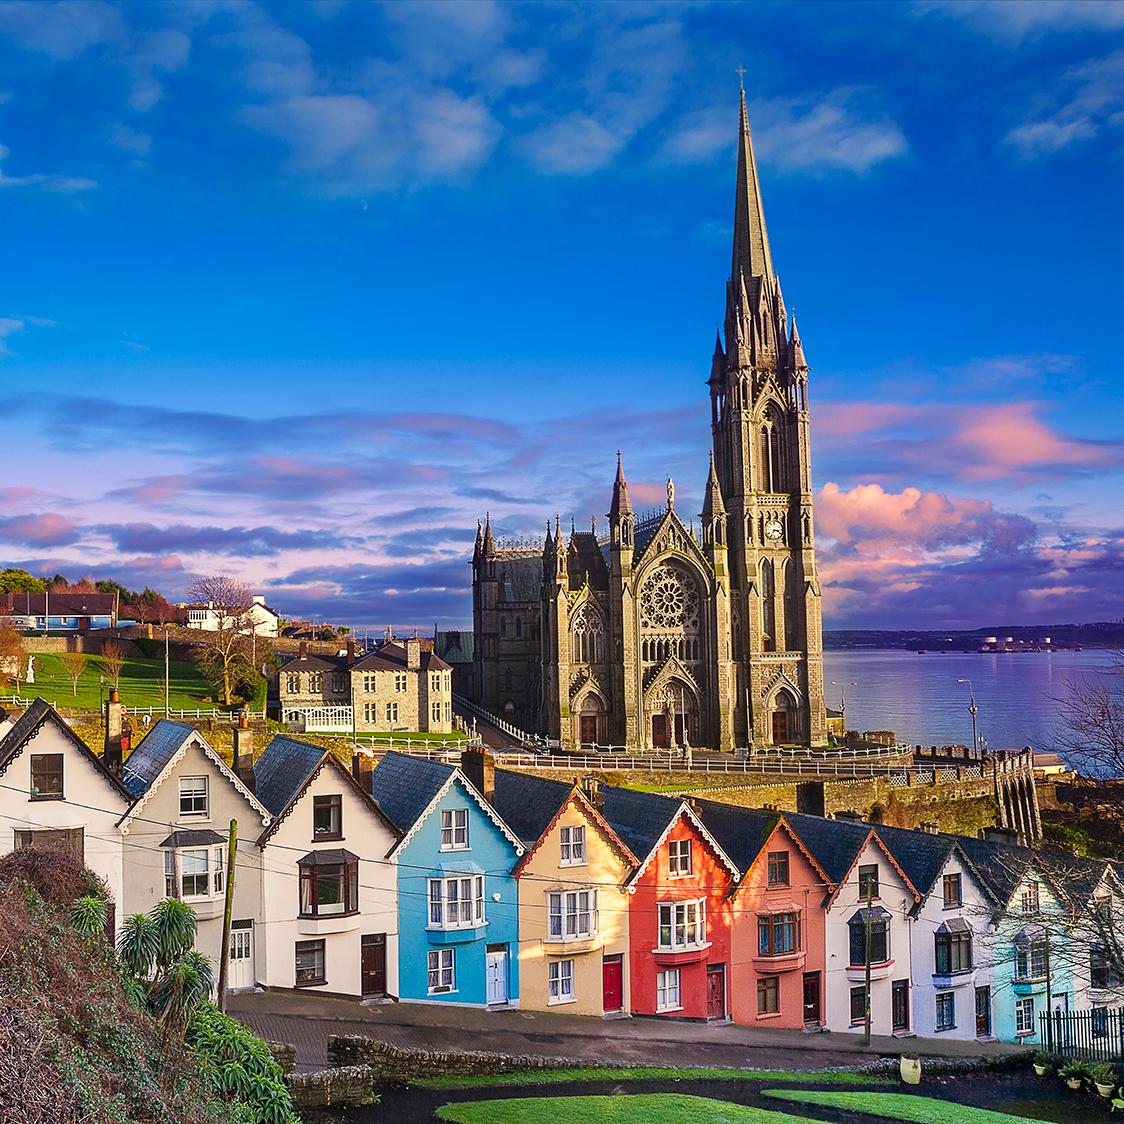 Take a tour through Ireland and stop by St. Coleman’s Cathedral in Cobh